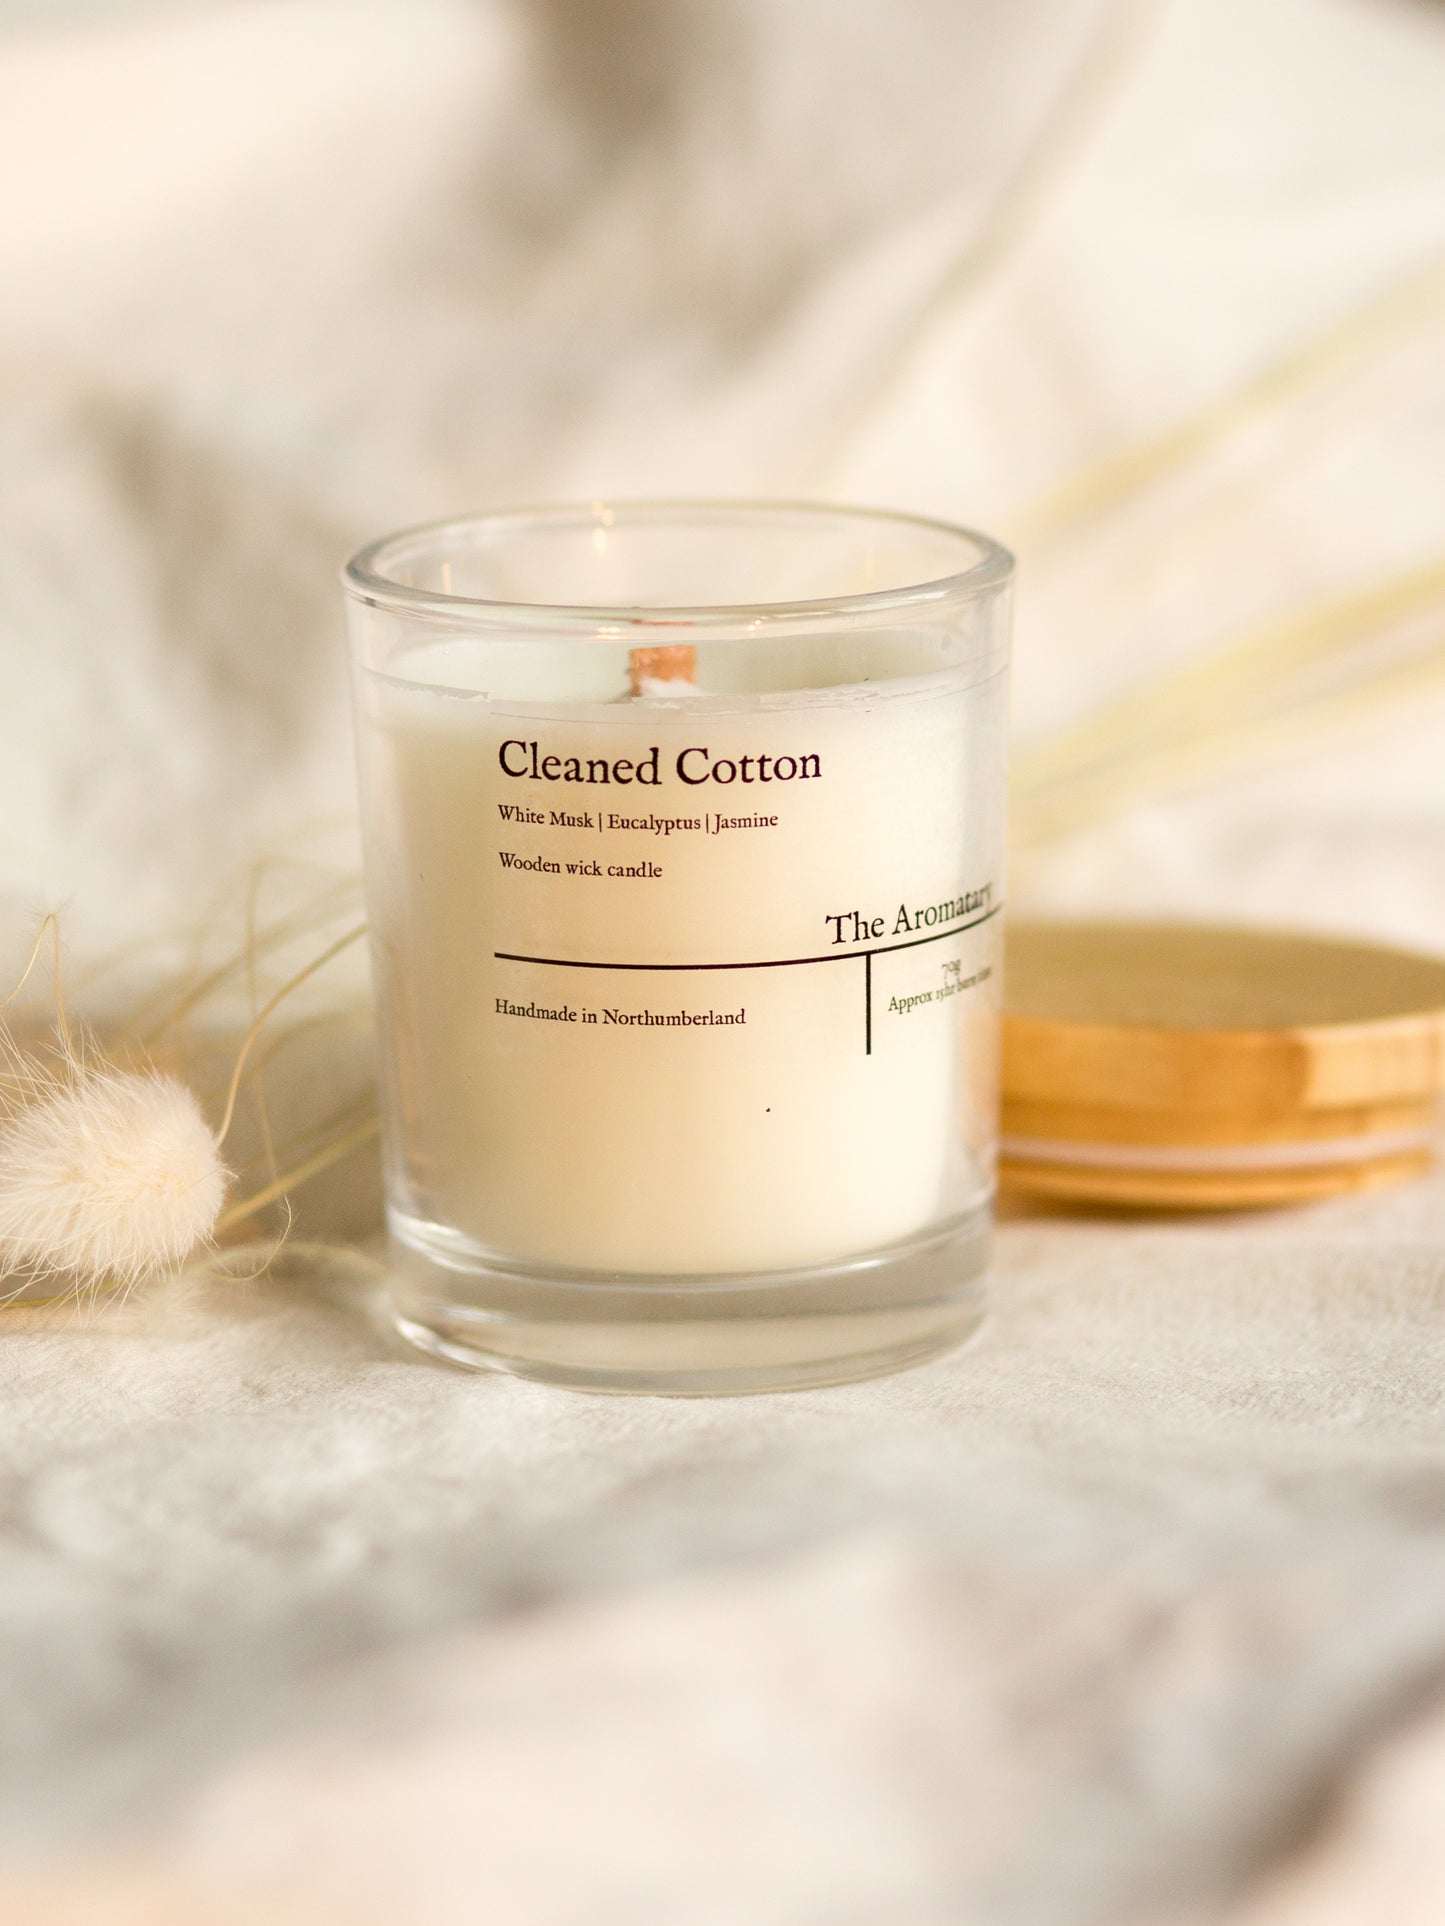 Cleaned Cotton wooden wick votive